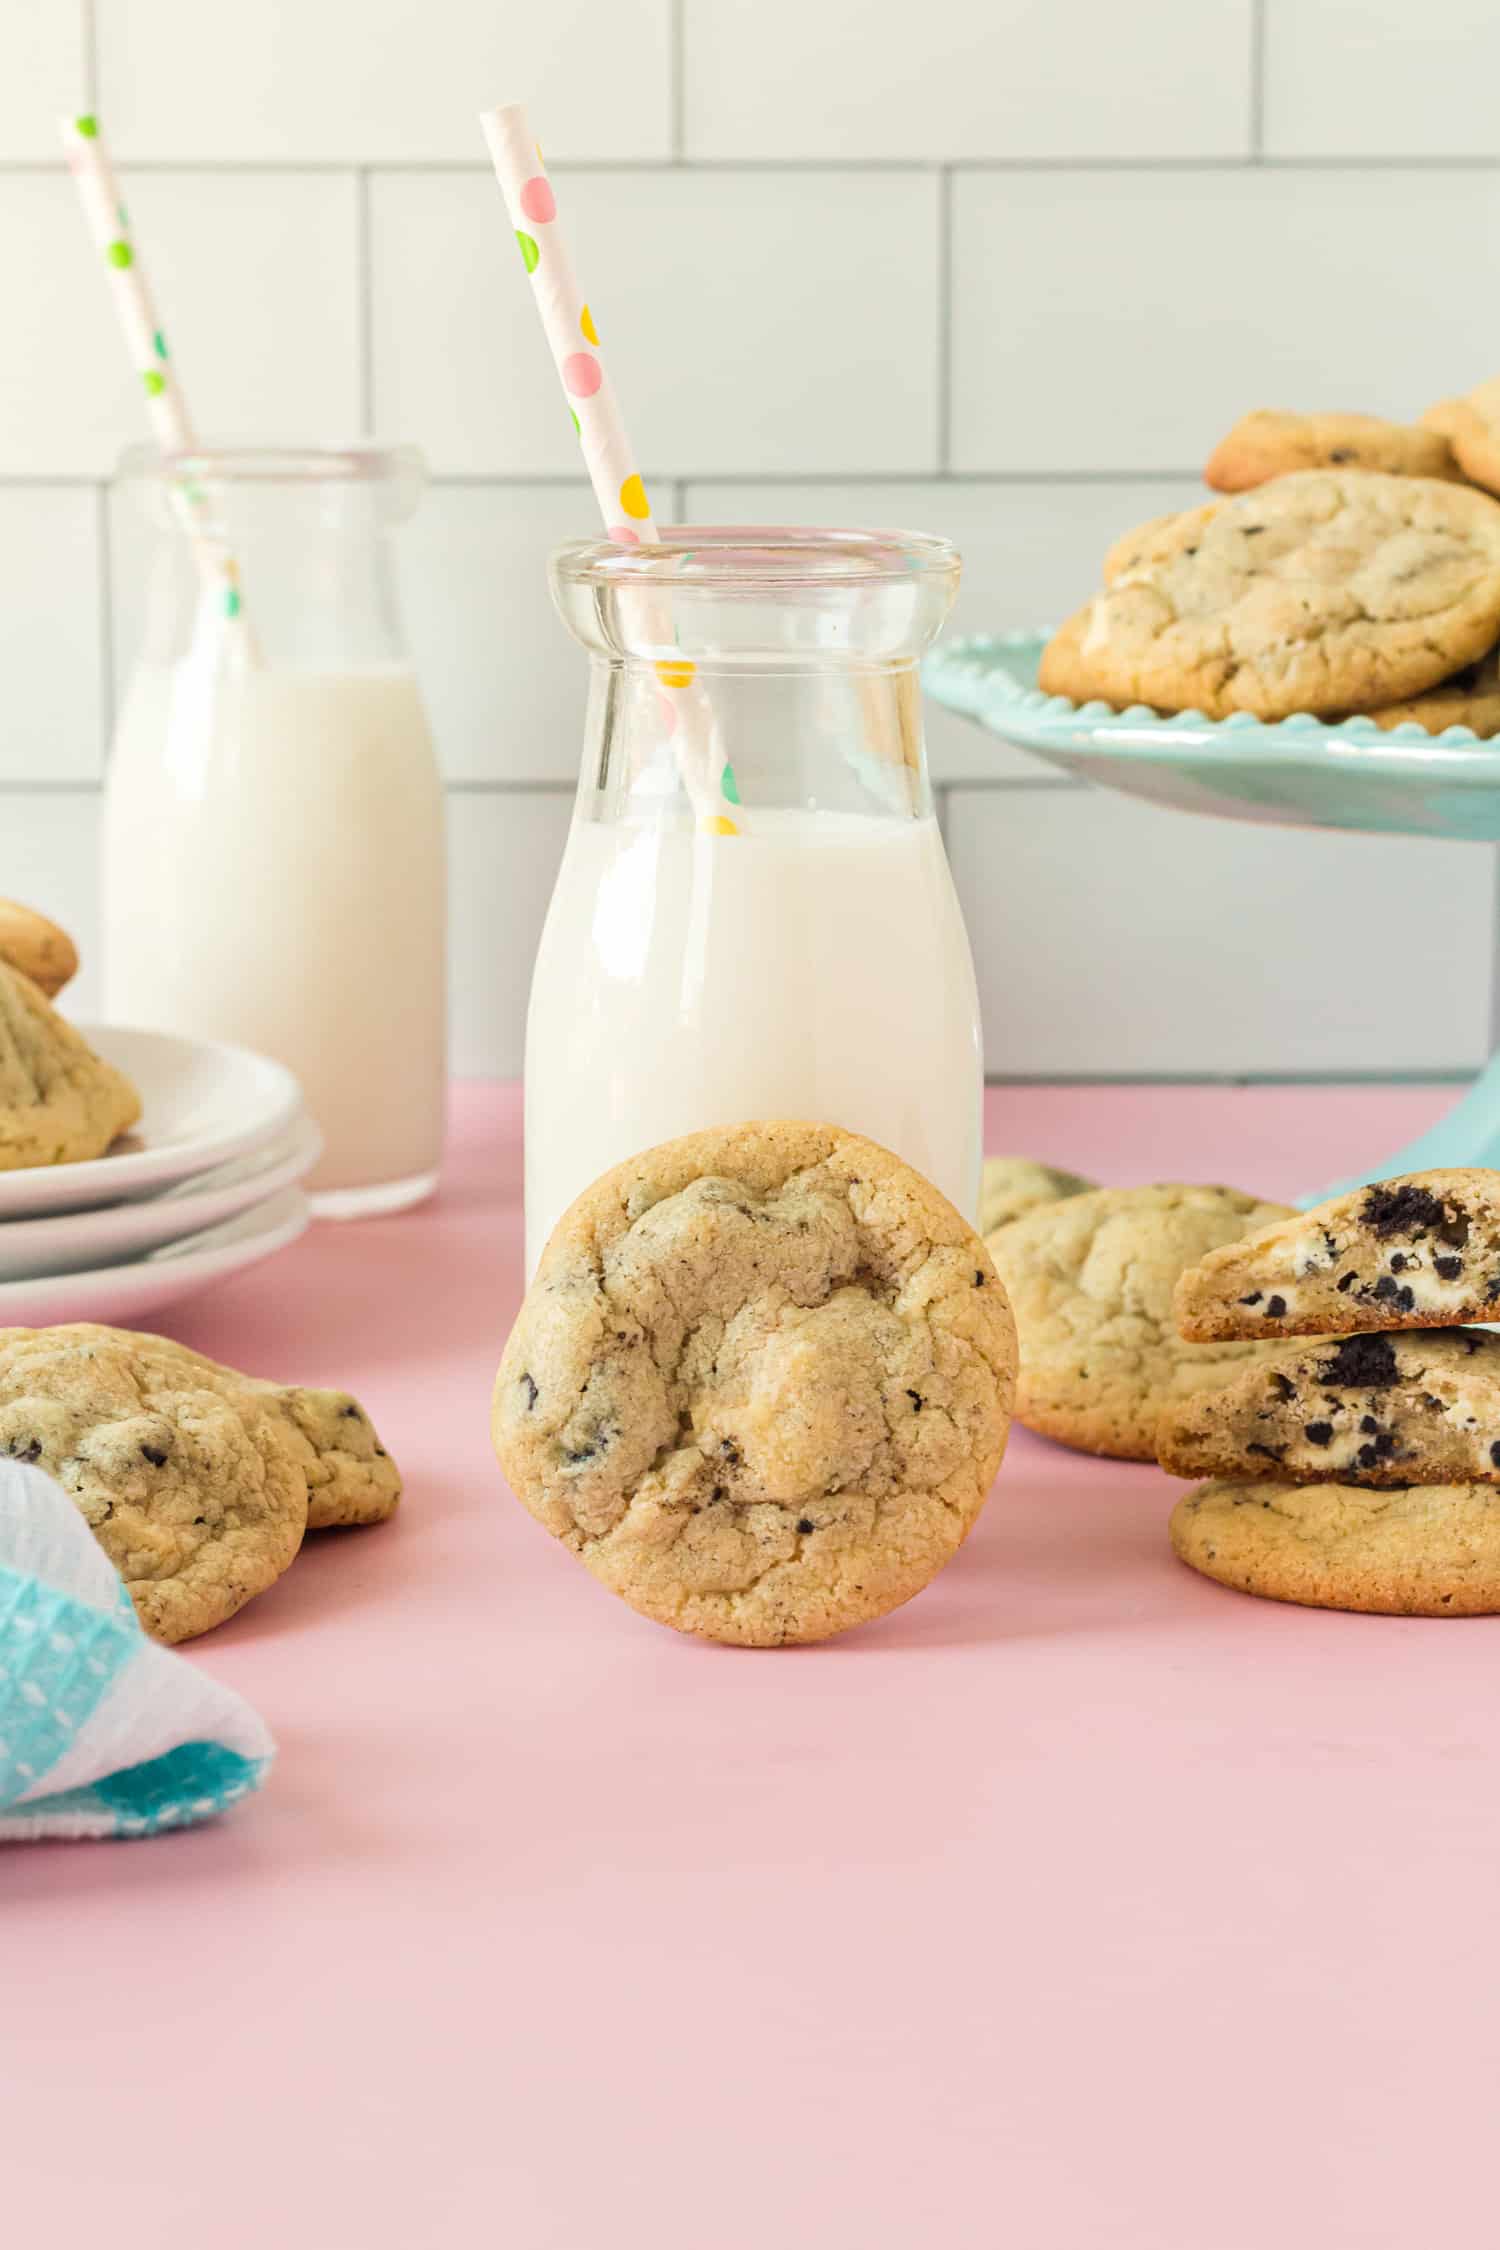 Moist pudding cookies pictured with glass of milk